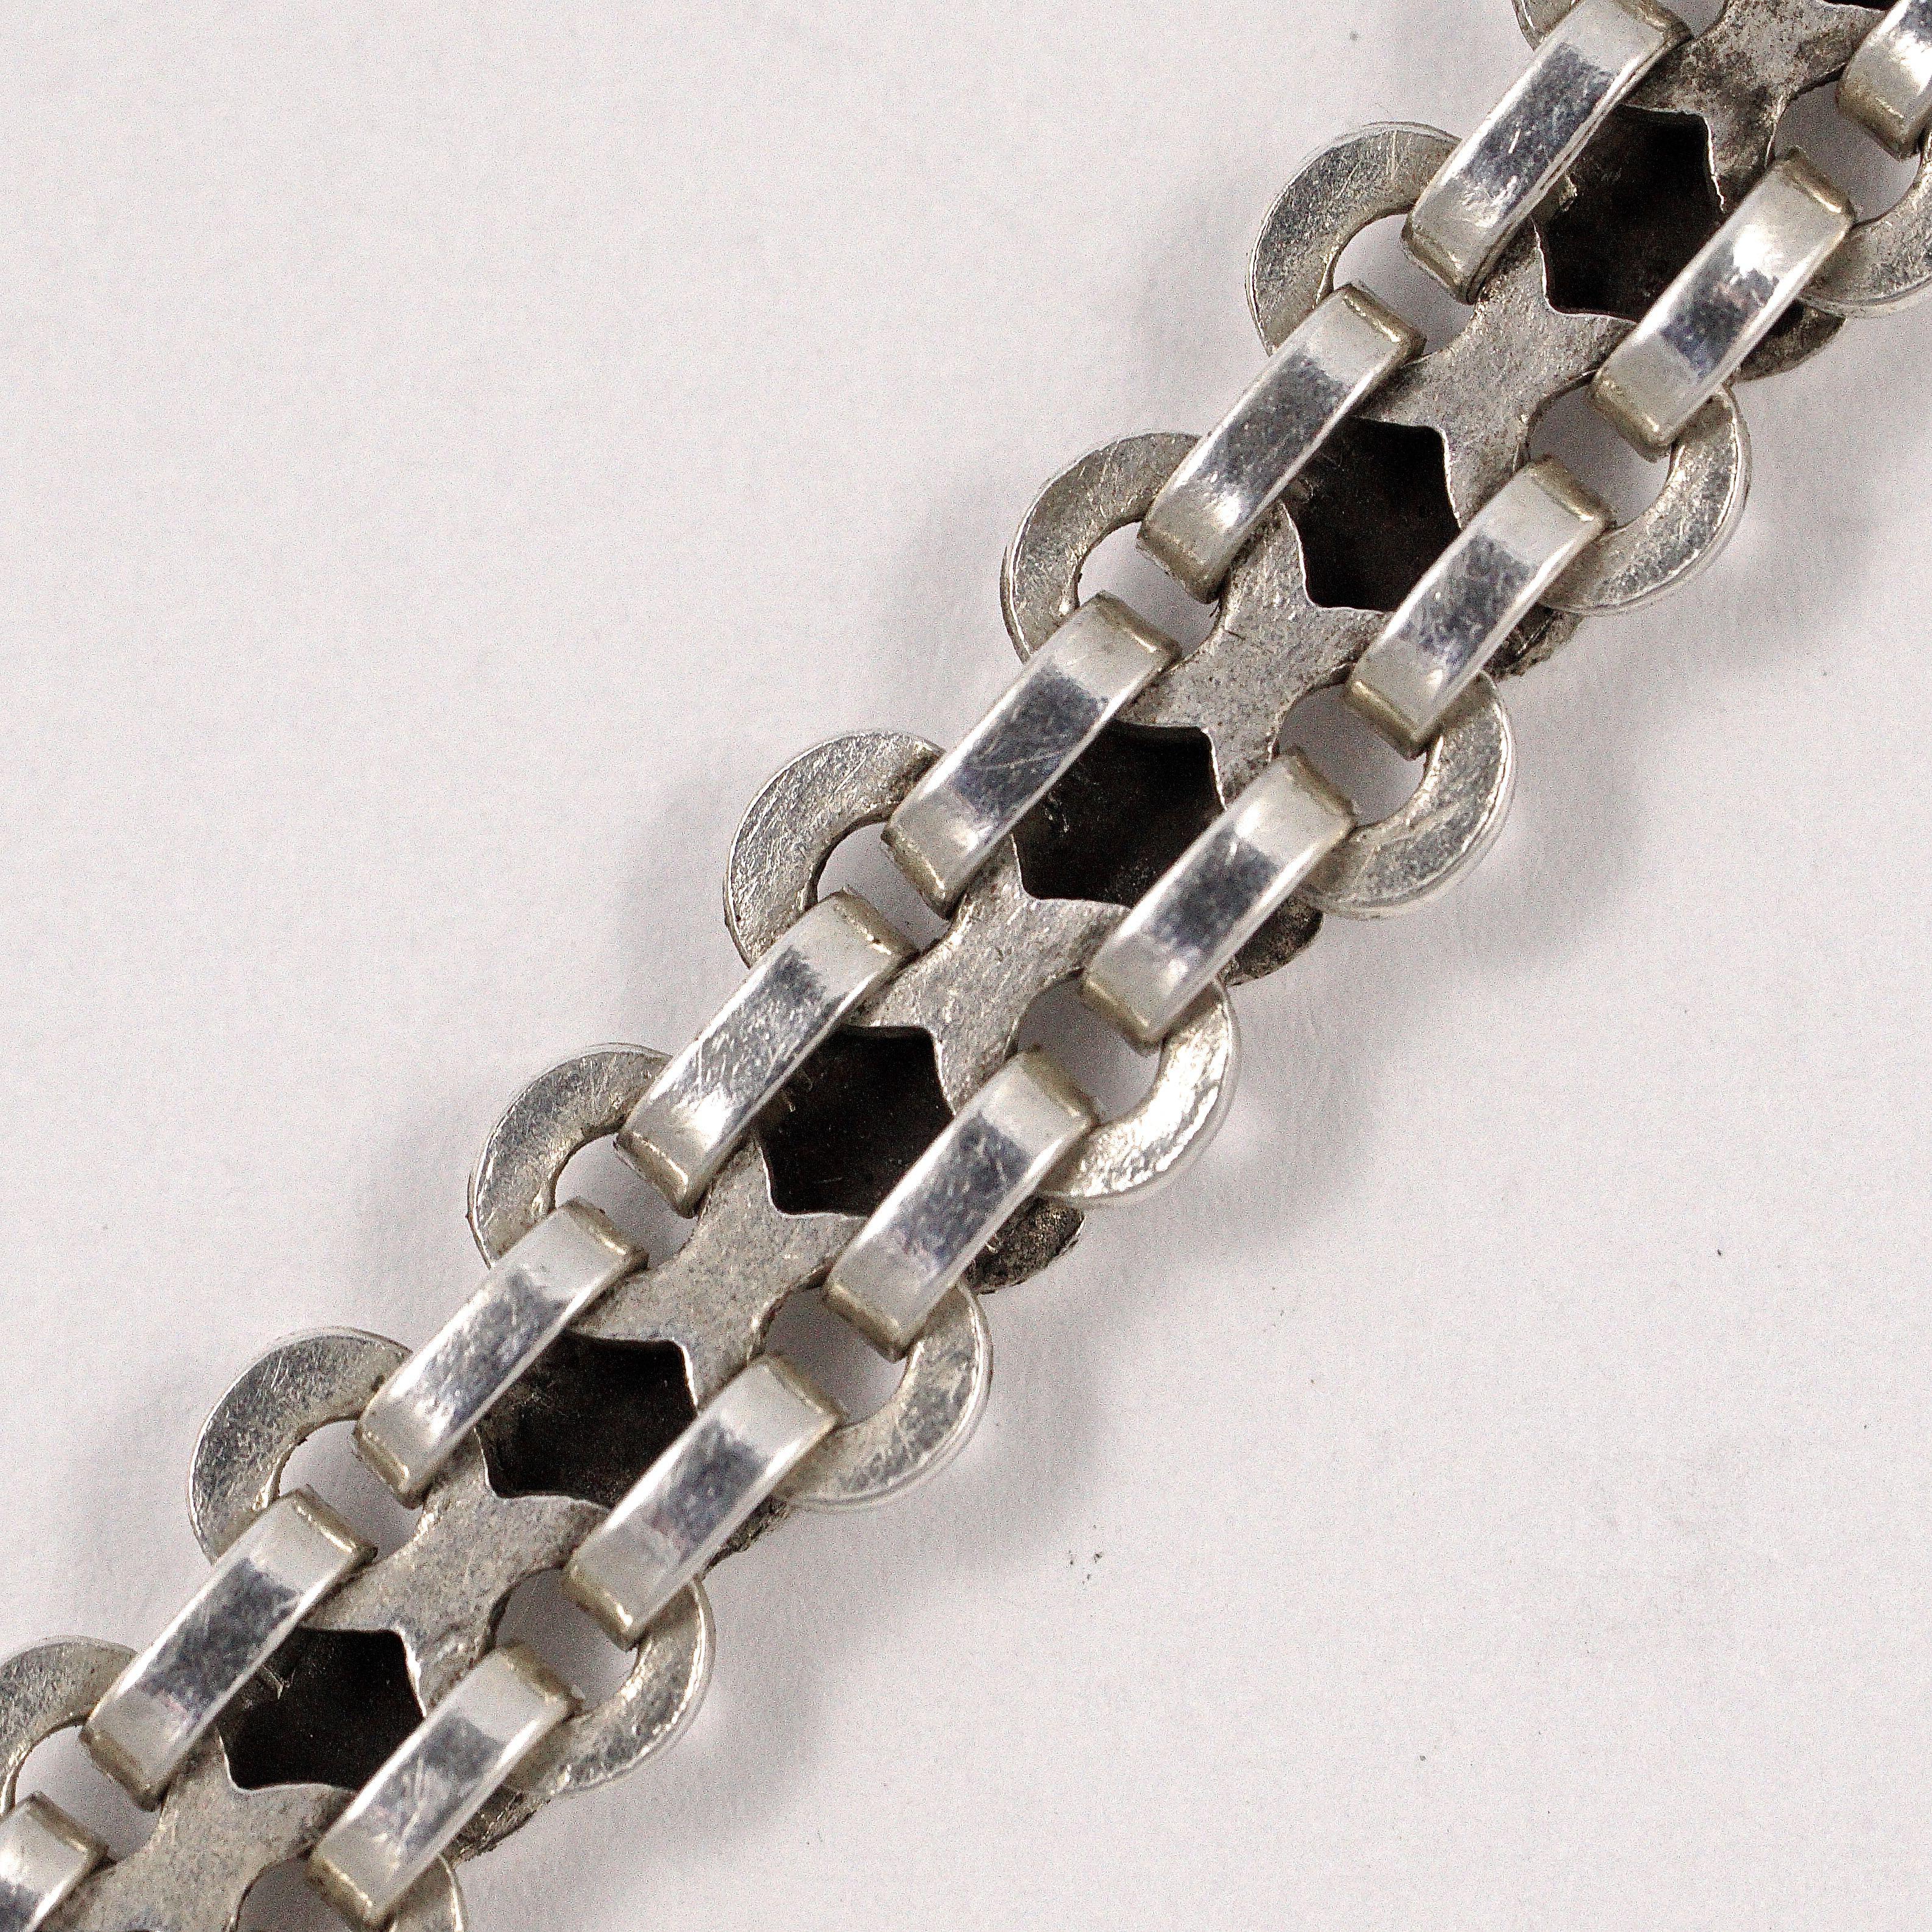 Rajasthan India Silver Chain Decorative Link Bracelet with Simple Hook Fastening 3